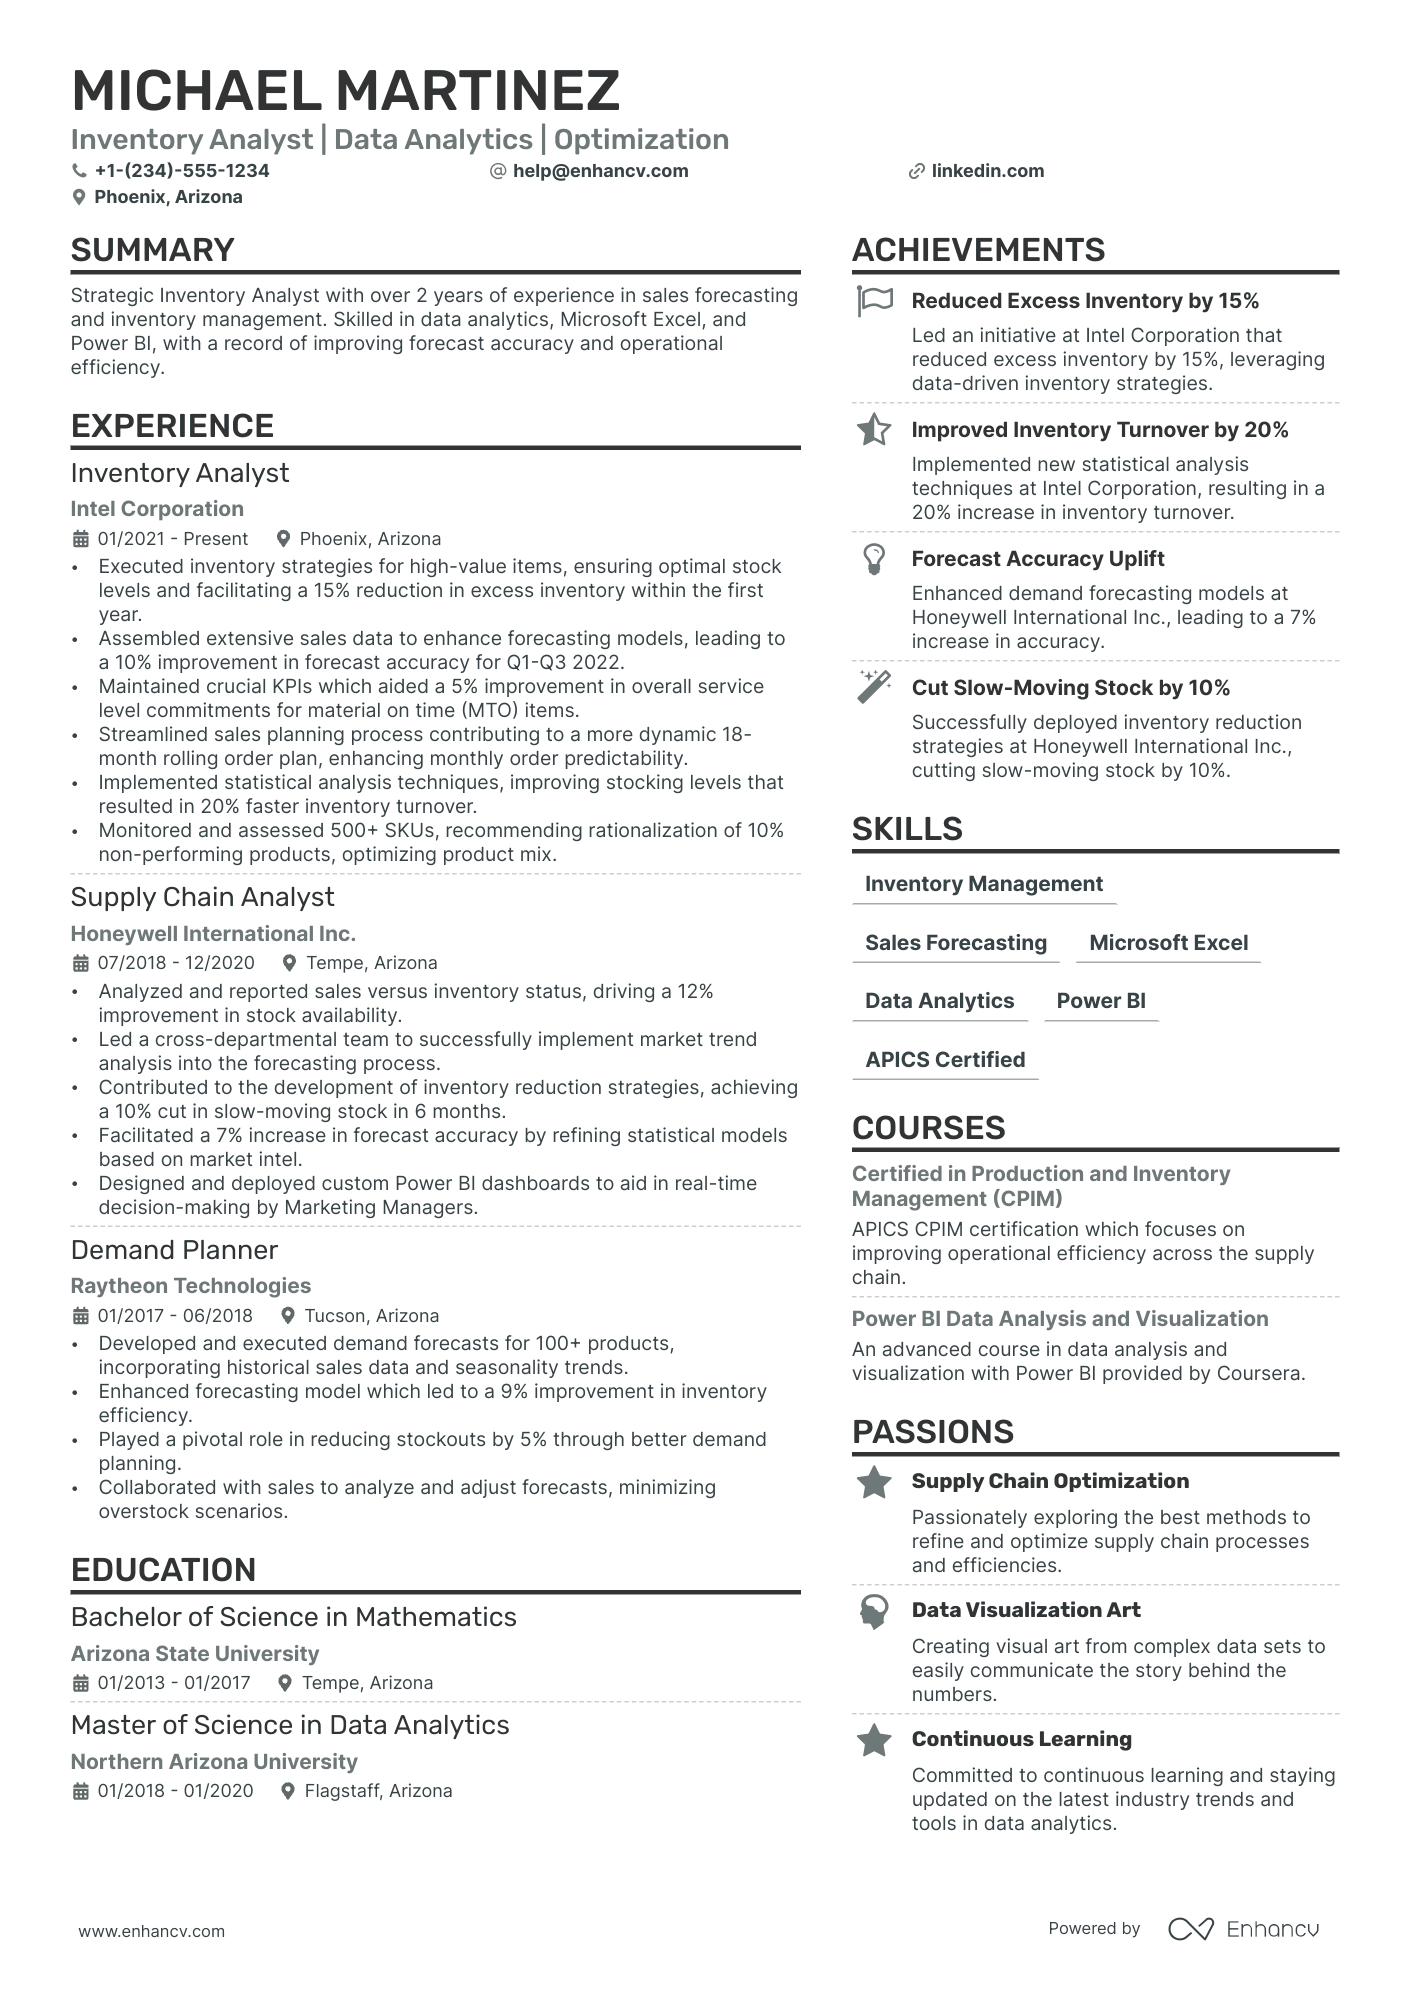 Demand Planning Manager resume example